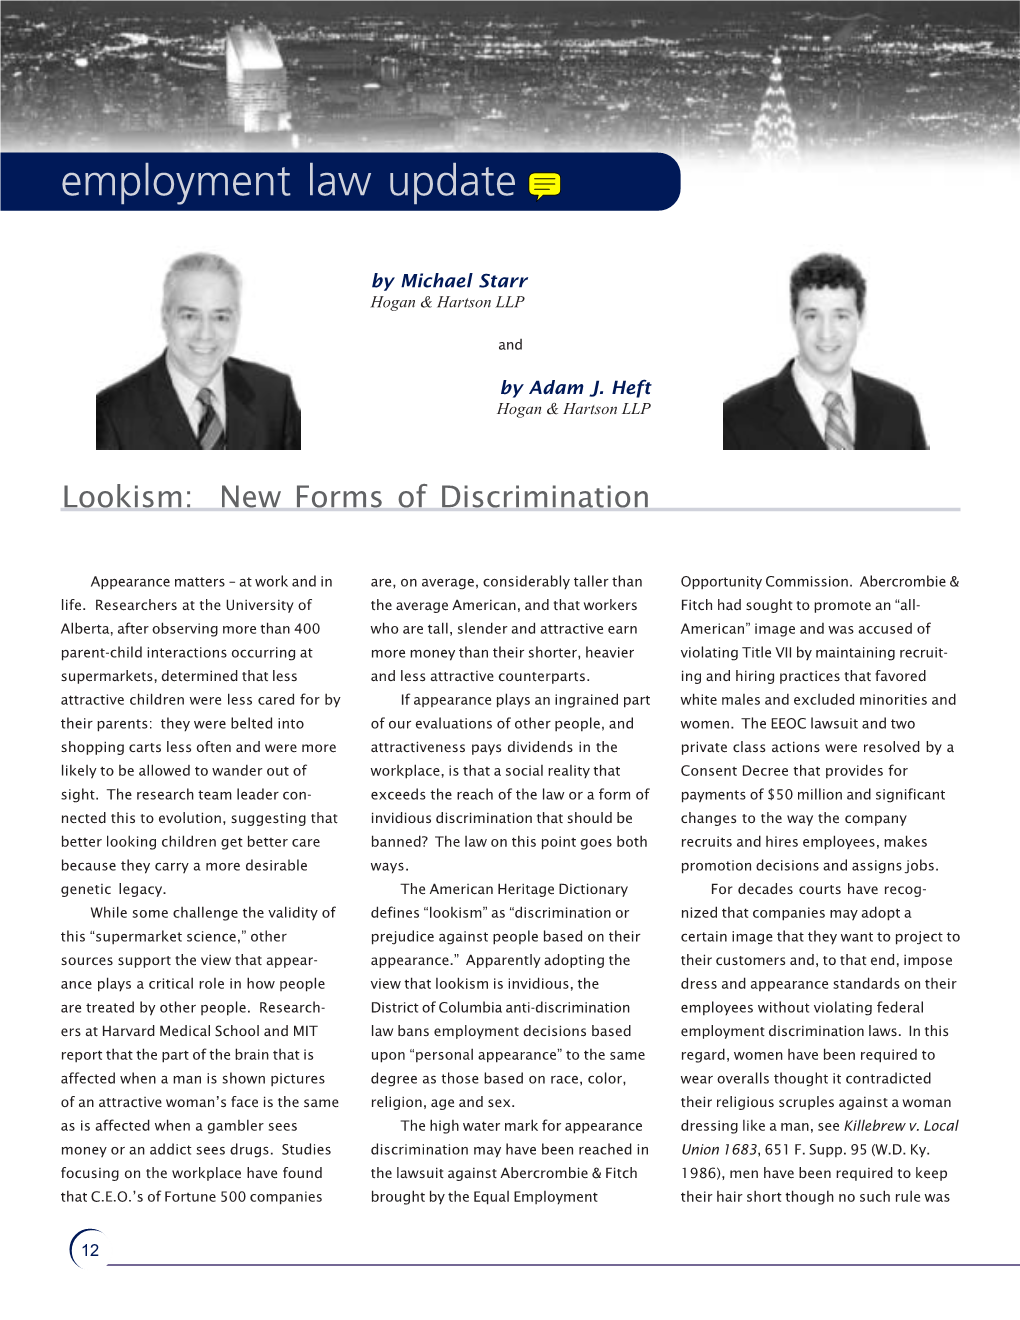 Lookism: New Forms of Discrimination